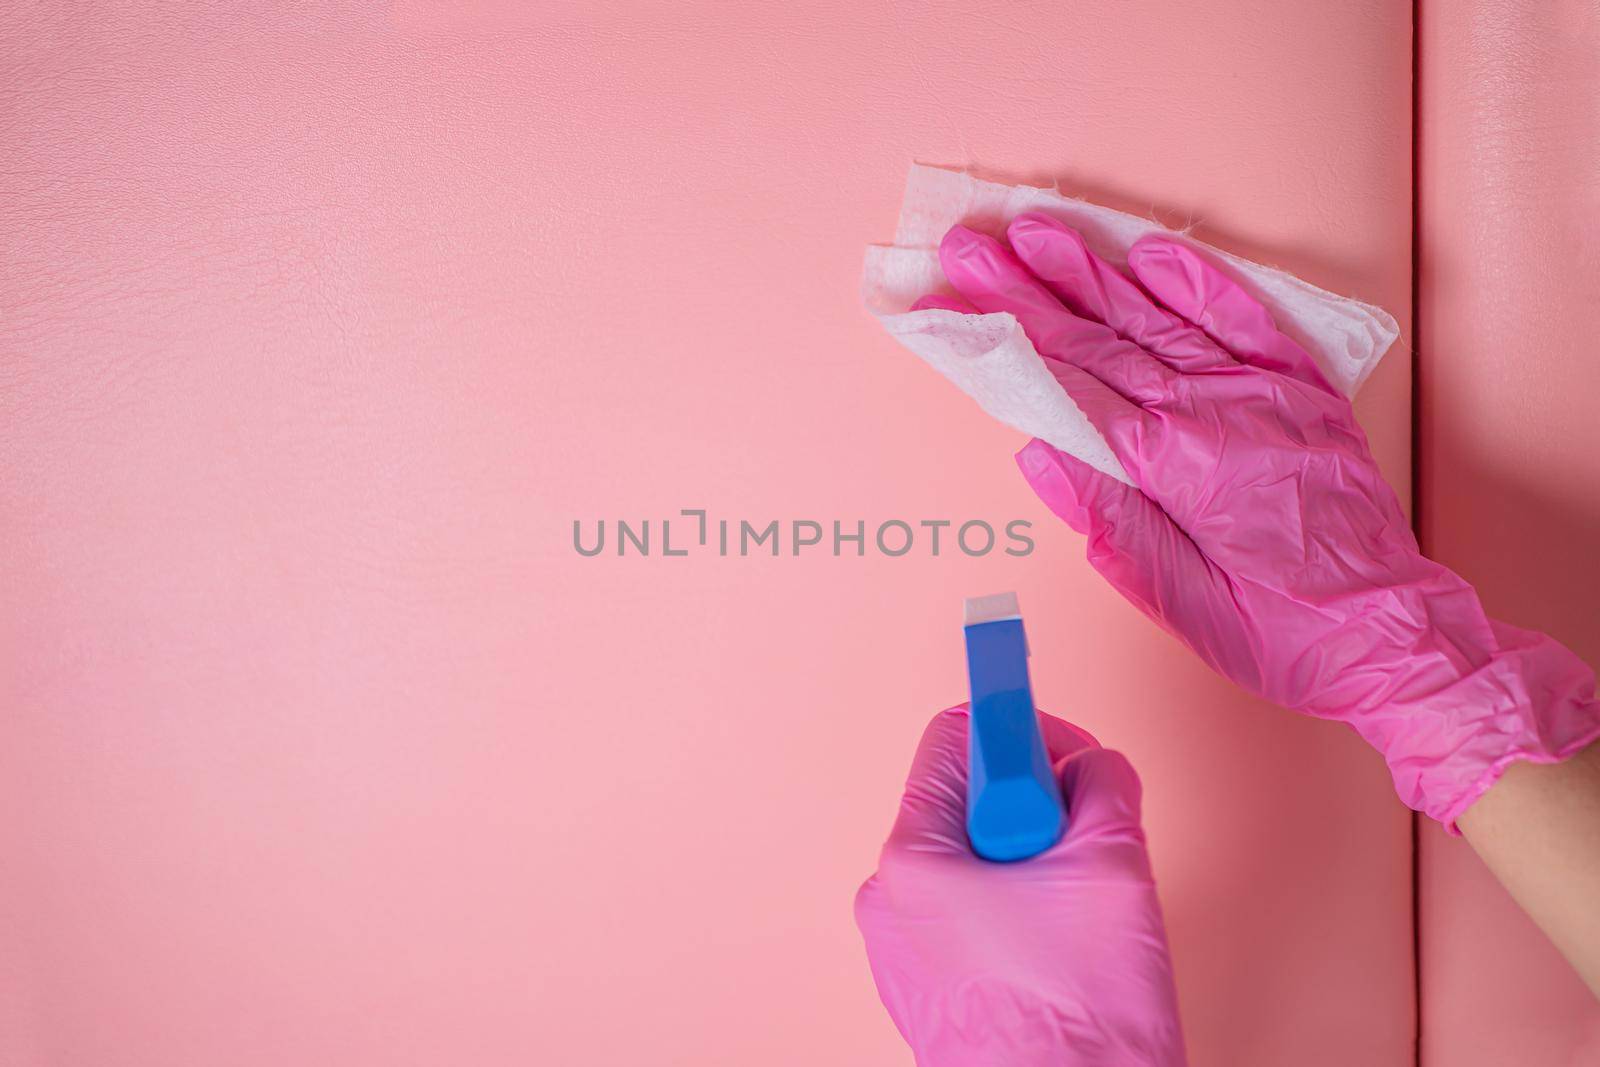 An employee in pink gloves disinfects the patient's couch with a disinfectant spray and a clean napkin. The staff cleans to prevent the spread of viruses and bacteria.